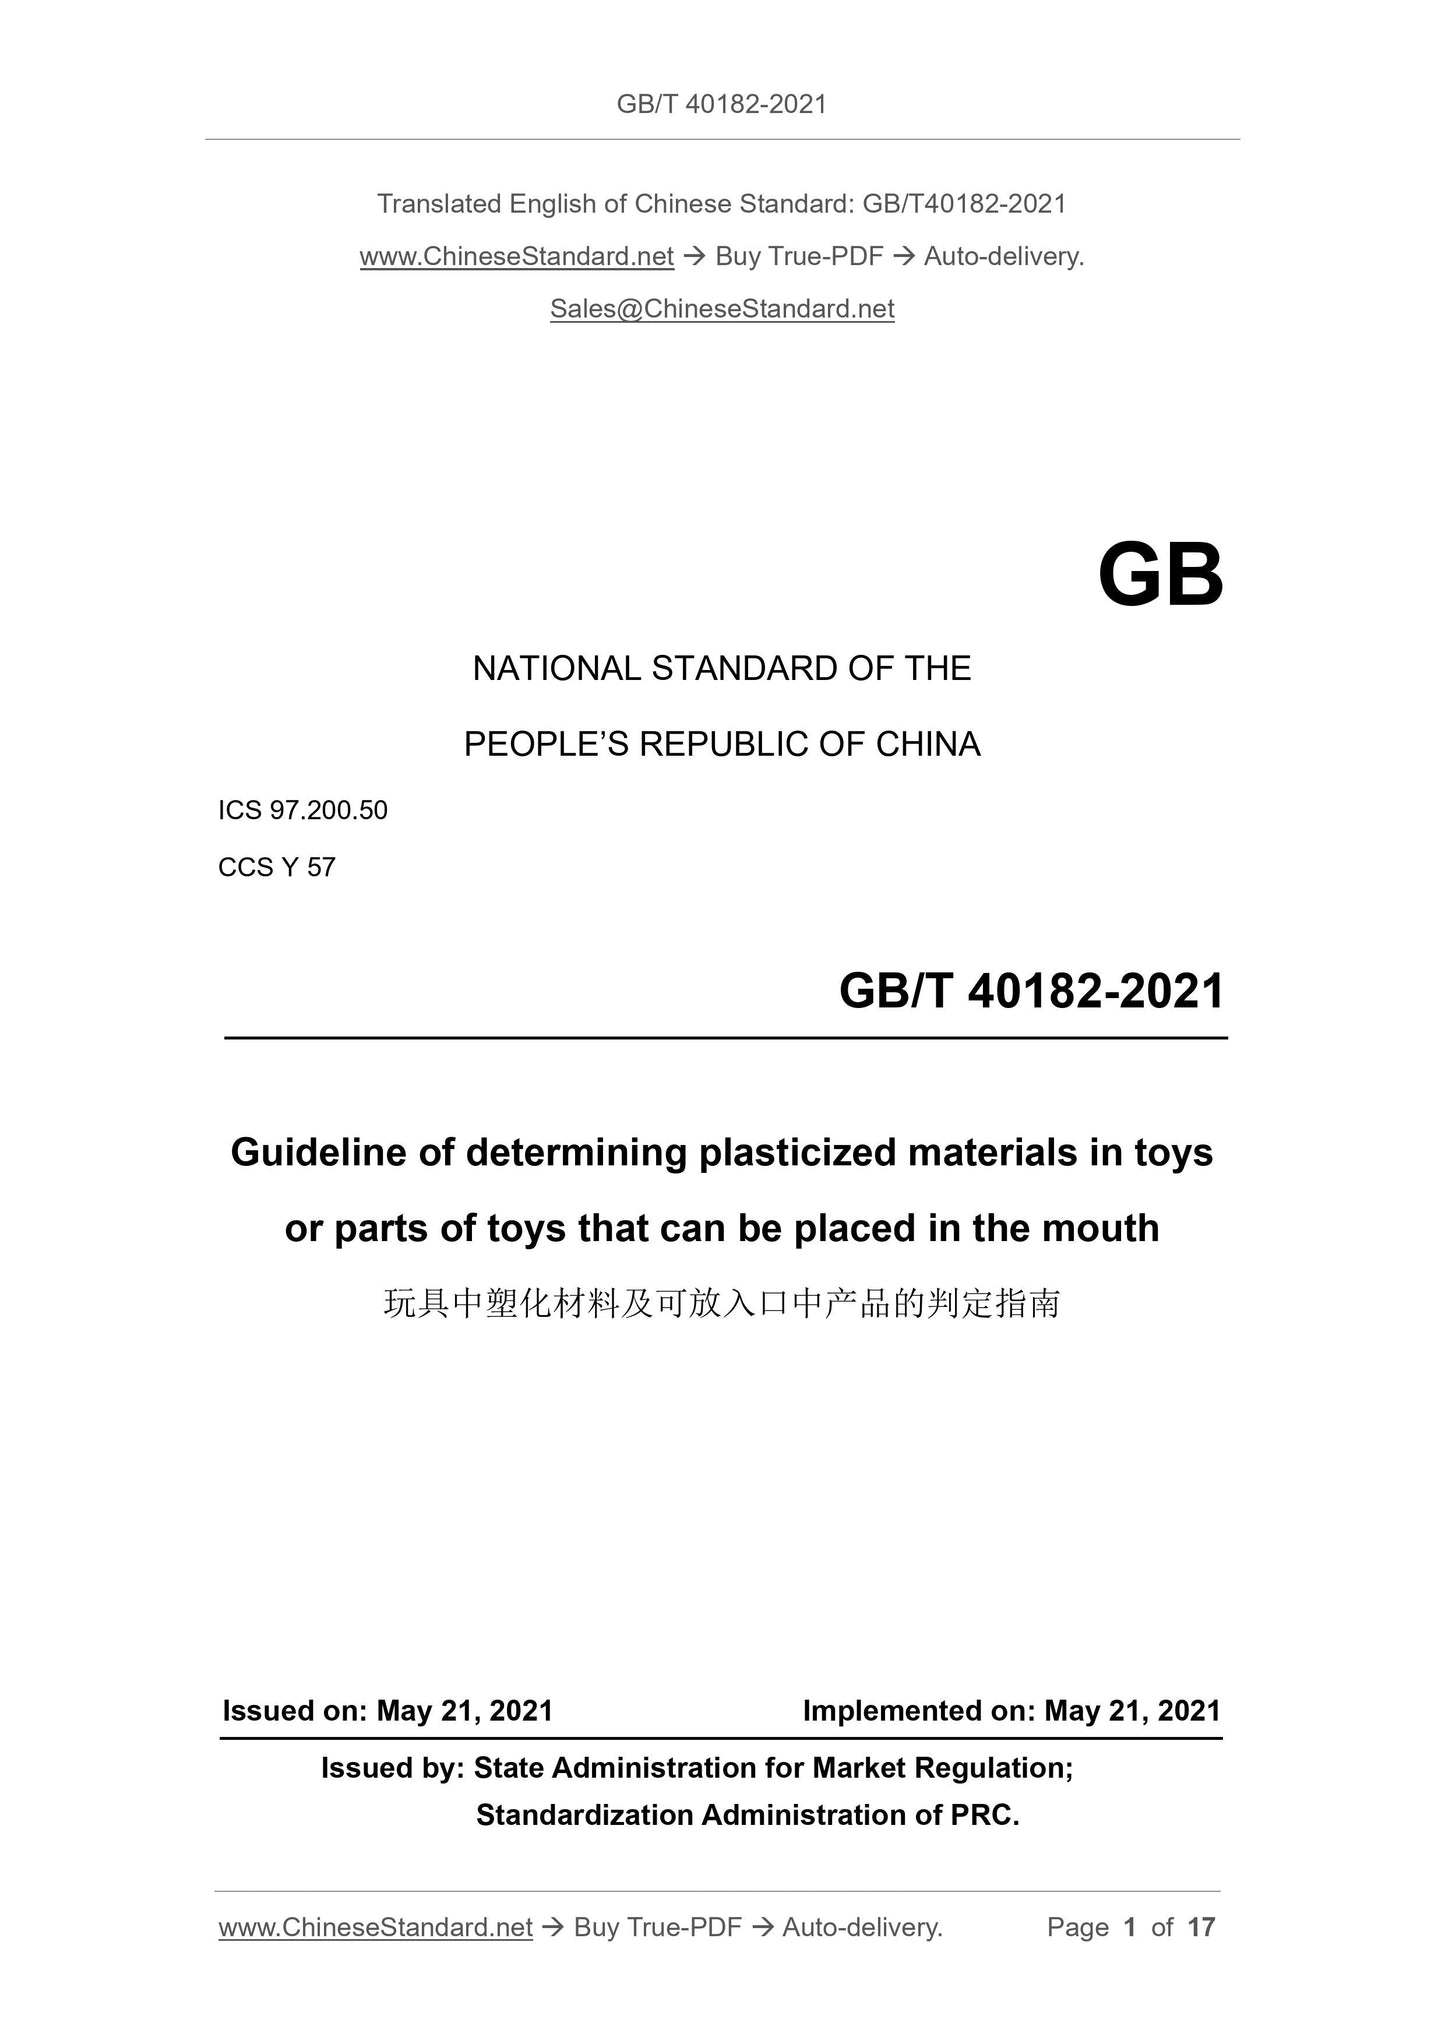 GB/T 40182-2021 Page 1